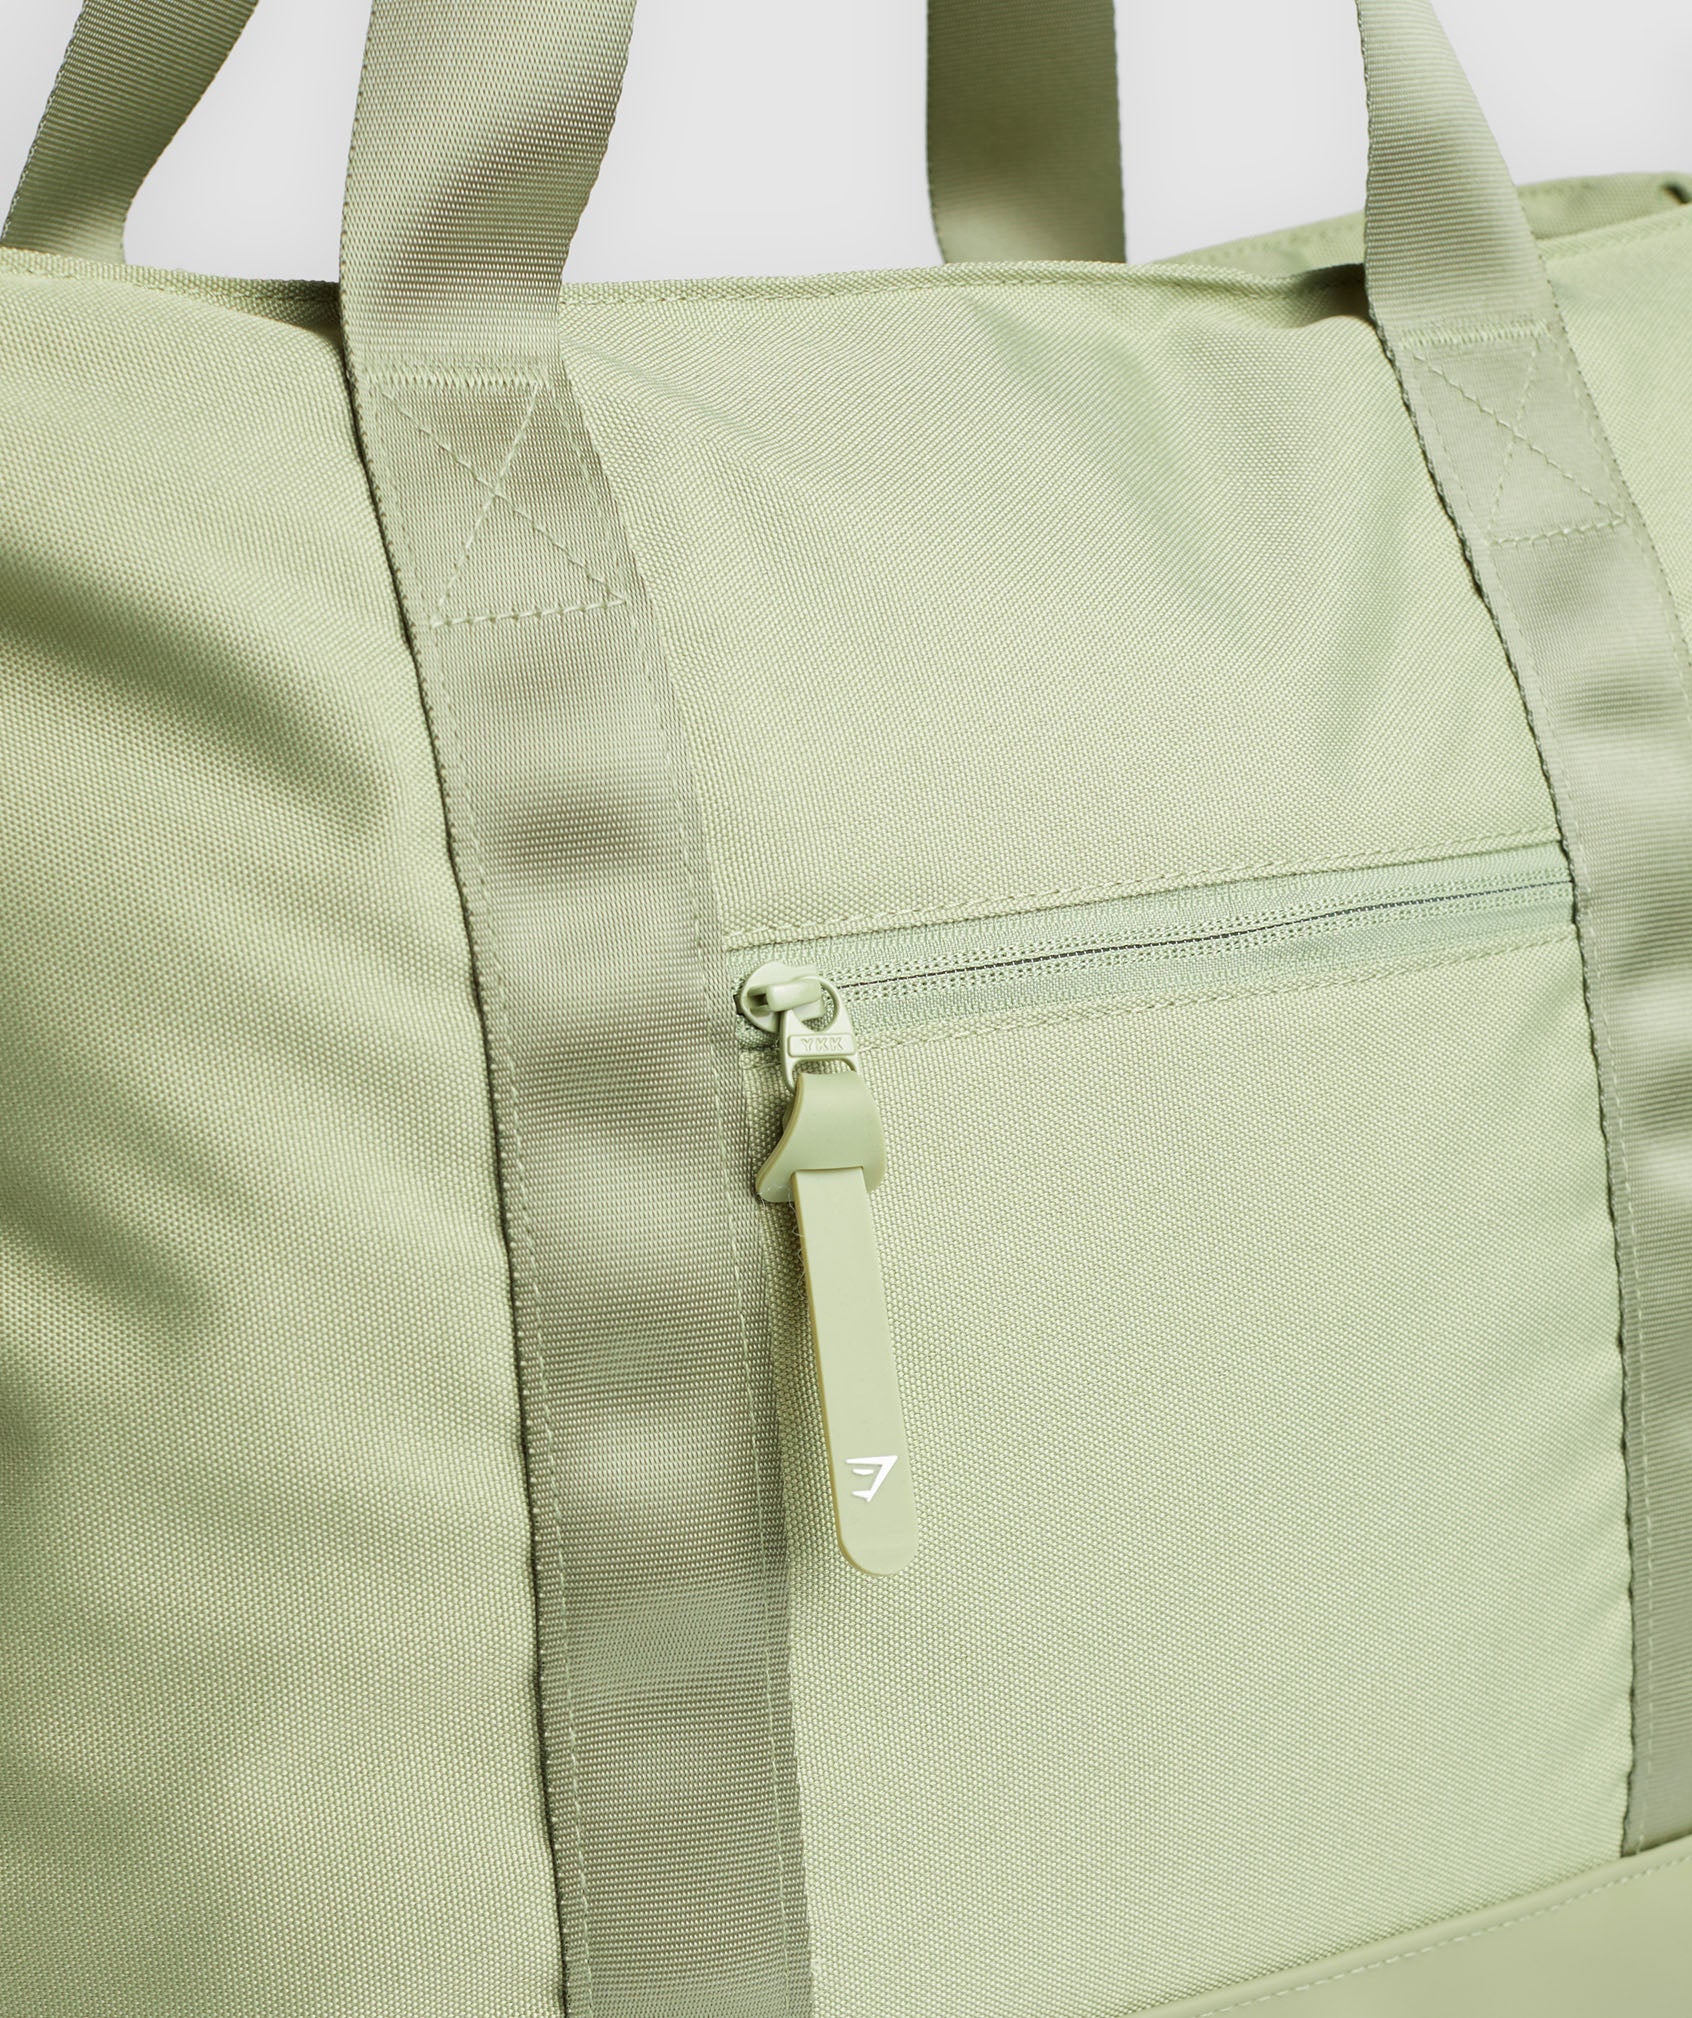 Everyday Tote in Natural Sage Green - view 3